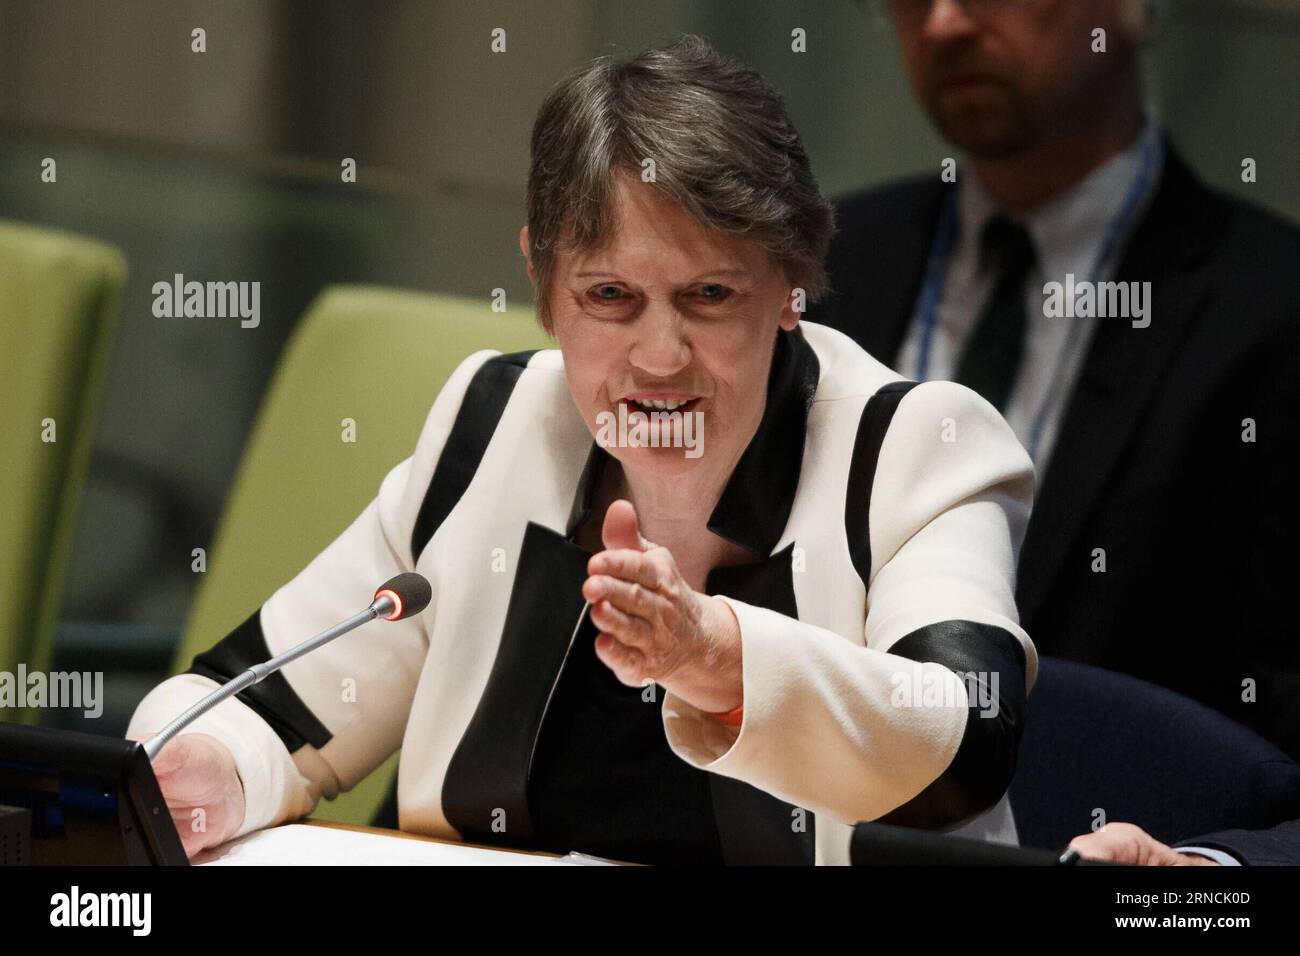 (160414) -- NEW YORK, April 14, 2016 -- Helen Clark, former Prime Minister of New Zealand and Administrator of the United Nations Development Programme (UNDP), candidate for the position of the next secretary-general, presents herself to the member states at the United Nations headquarters in New York, April 14, 2016. The UN General Assembly on Tuesday kicked off a three-day informal dialogue with candidates for the position of the next secretary-general. ) UN-NEW YORK-GENERAL ASSEMBLY-SECRETARY-GENERAL-CANDIDATE-HELEN CLARK LixMuzi PUBLICATIONxNOTxINxCHN   160414 New York April 14 2016 Helen Stock Photo